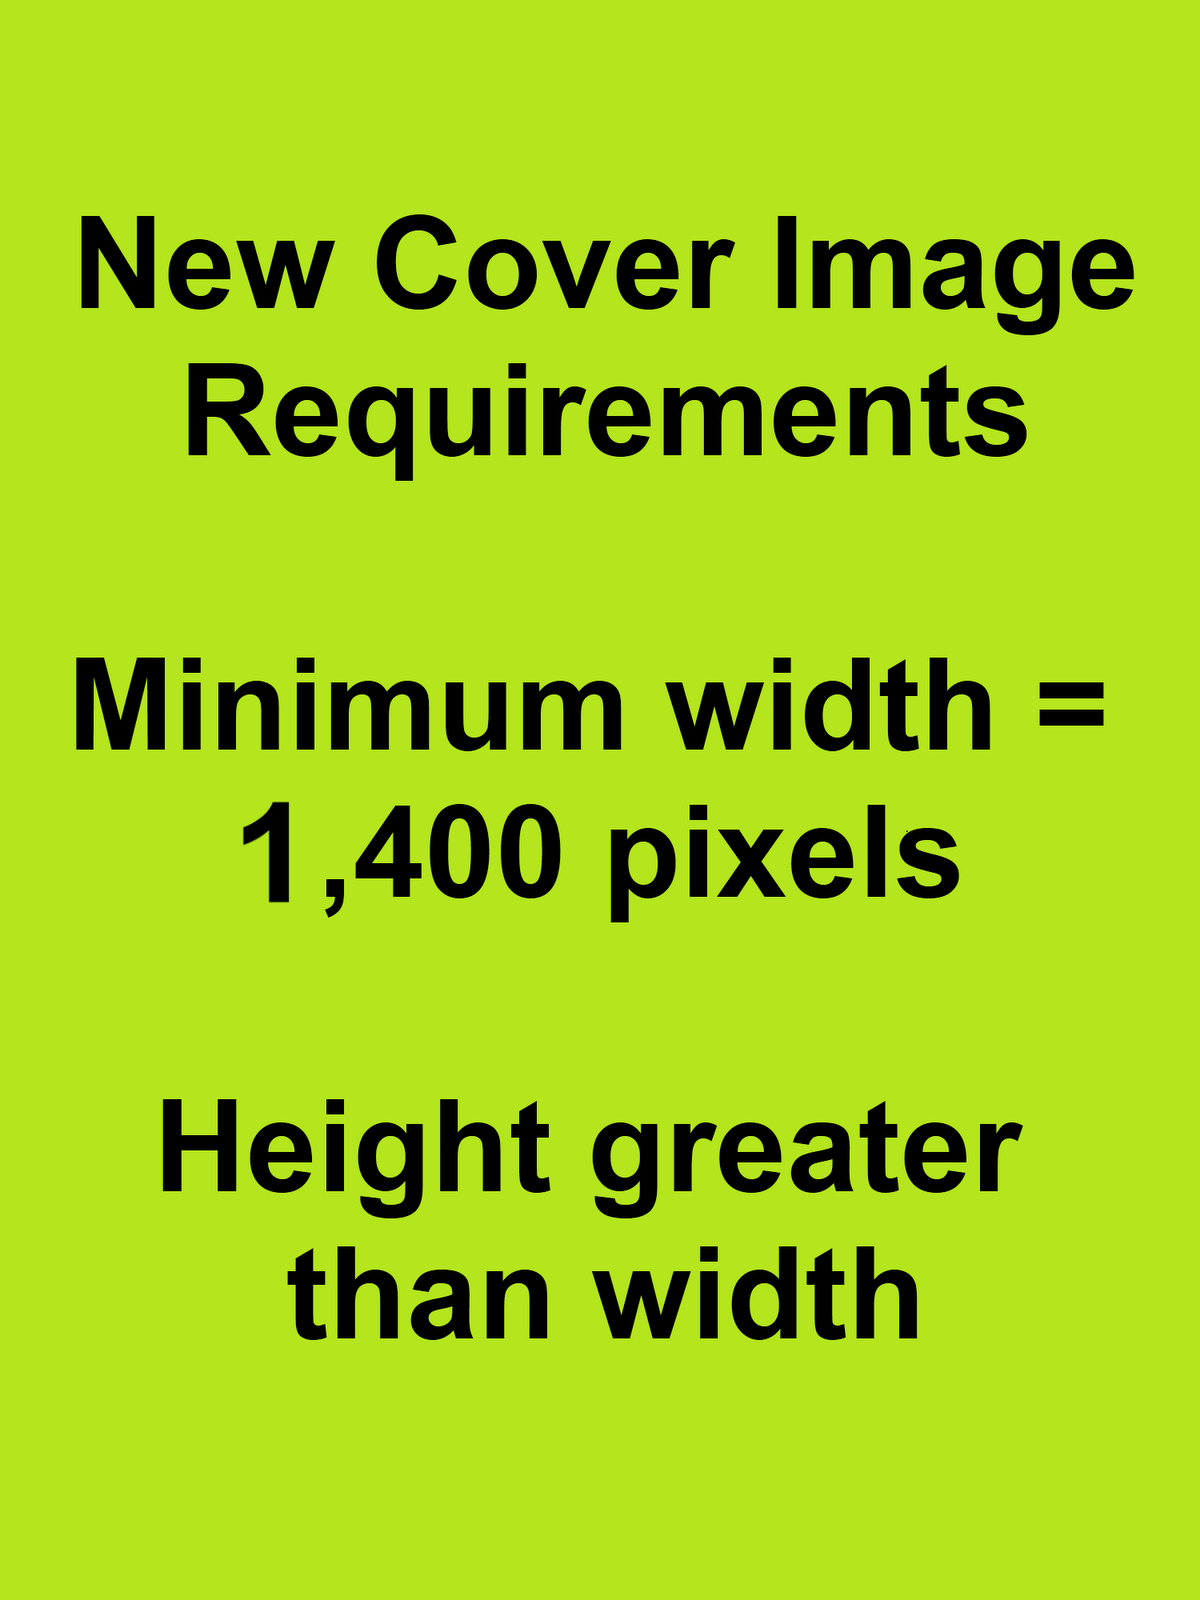 Smashwords New Ebook Cover Image Requirements Coming To Satisfy Higher Resolution E Reading Devices